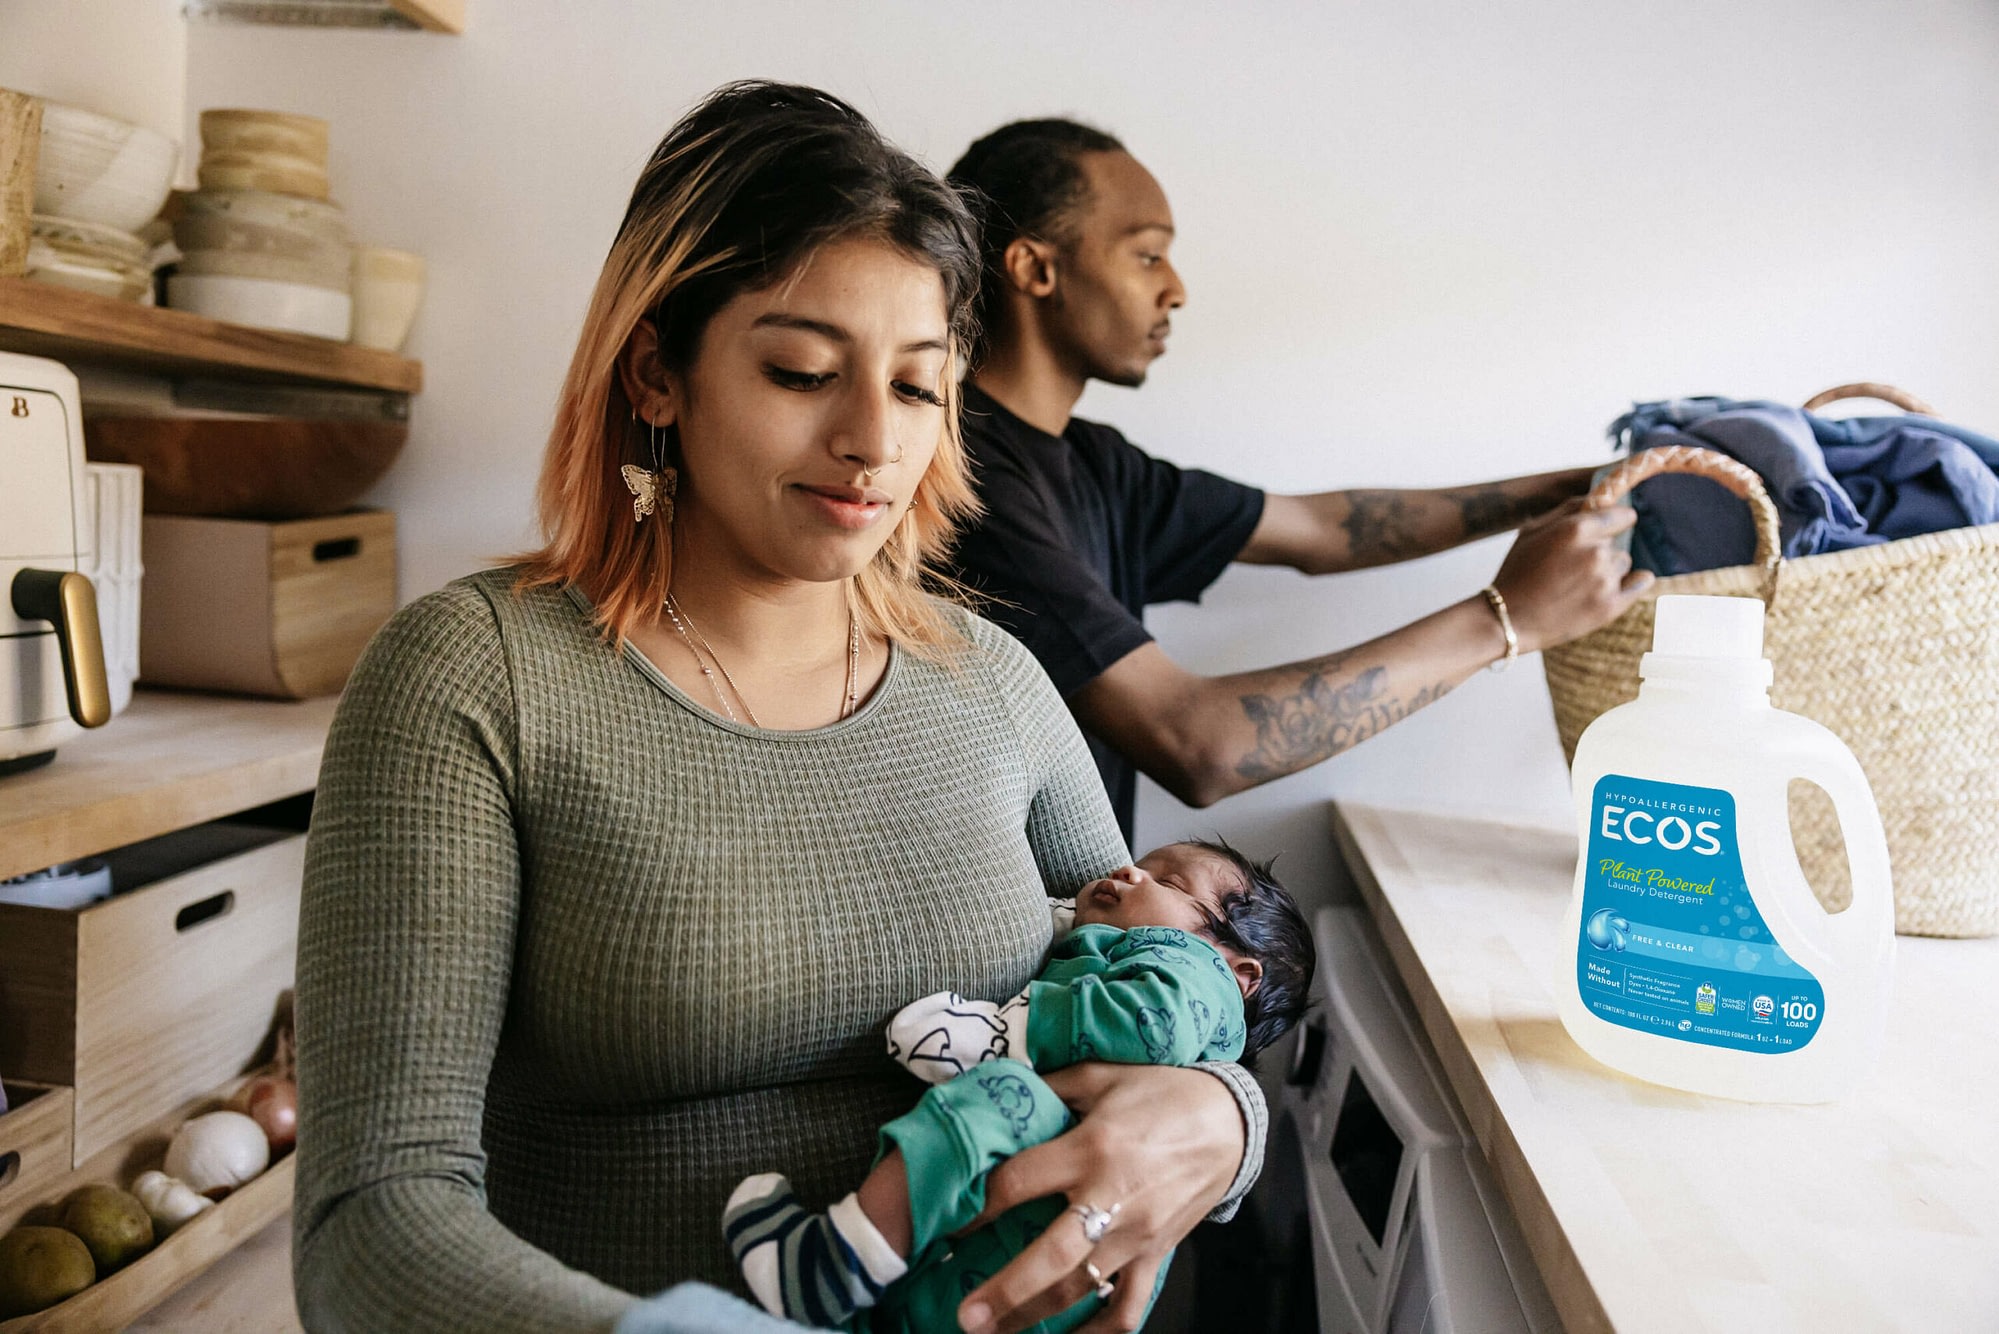 Mom holding newborn baby with dad in background doing laundry and ECOS laundry detergent on counter